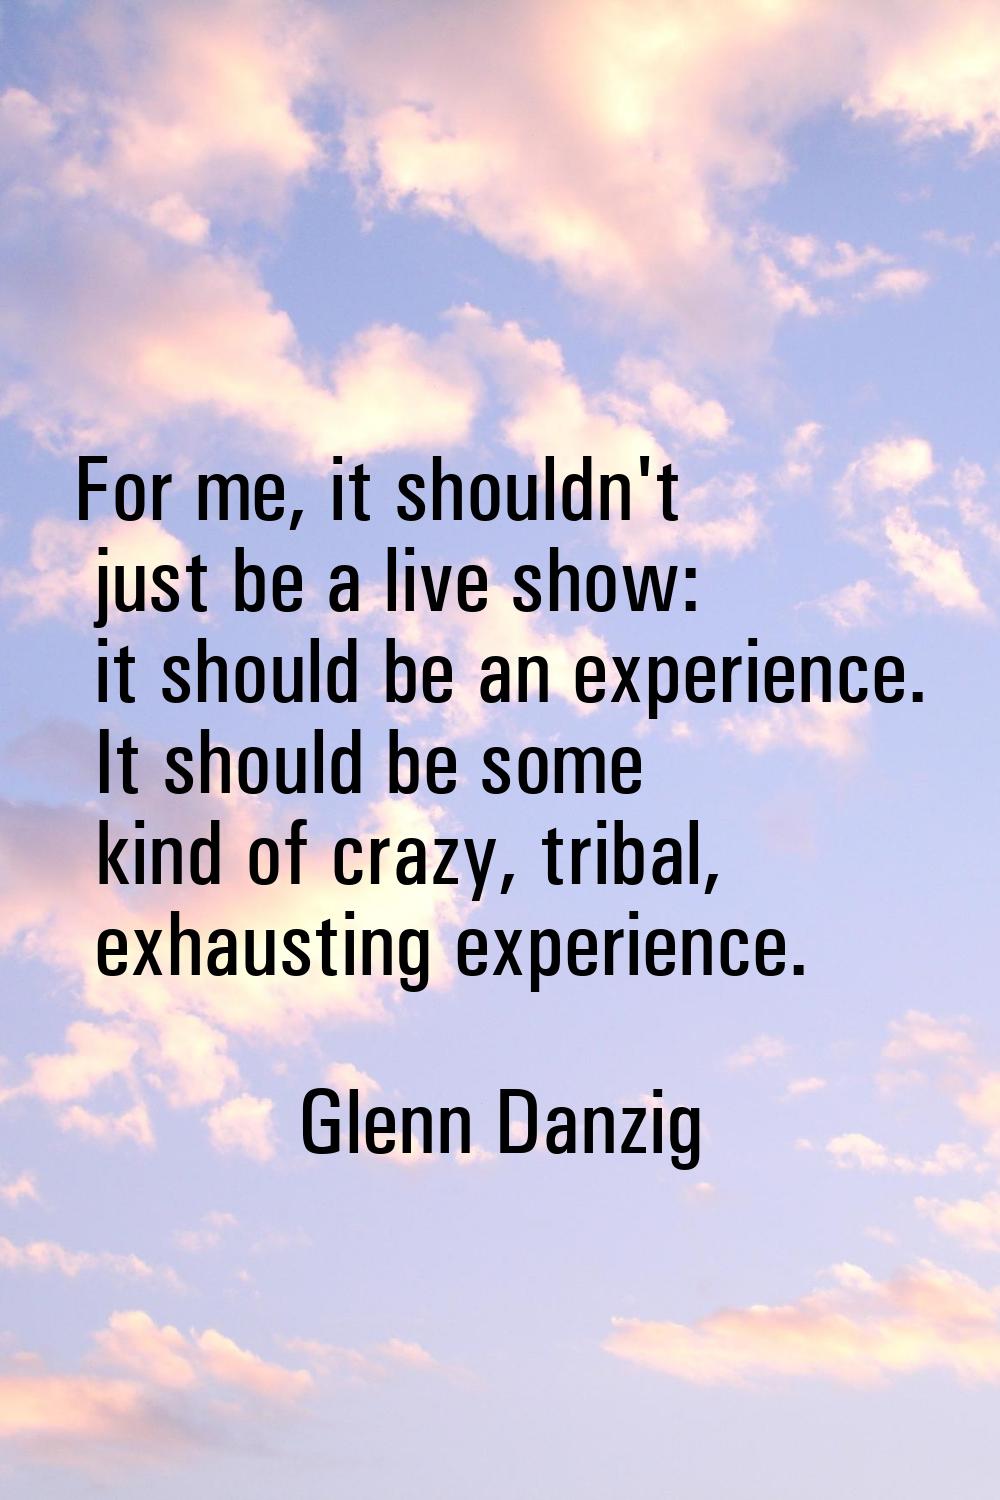 For me, it shouldn't just be a live show: it should be an experience. It should be some kind of cra